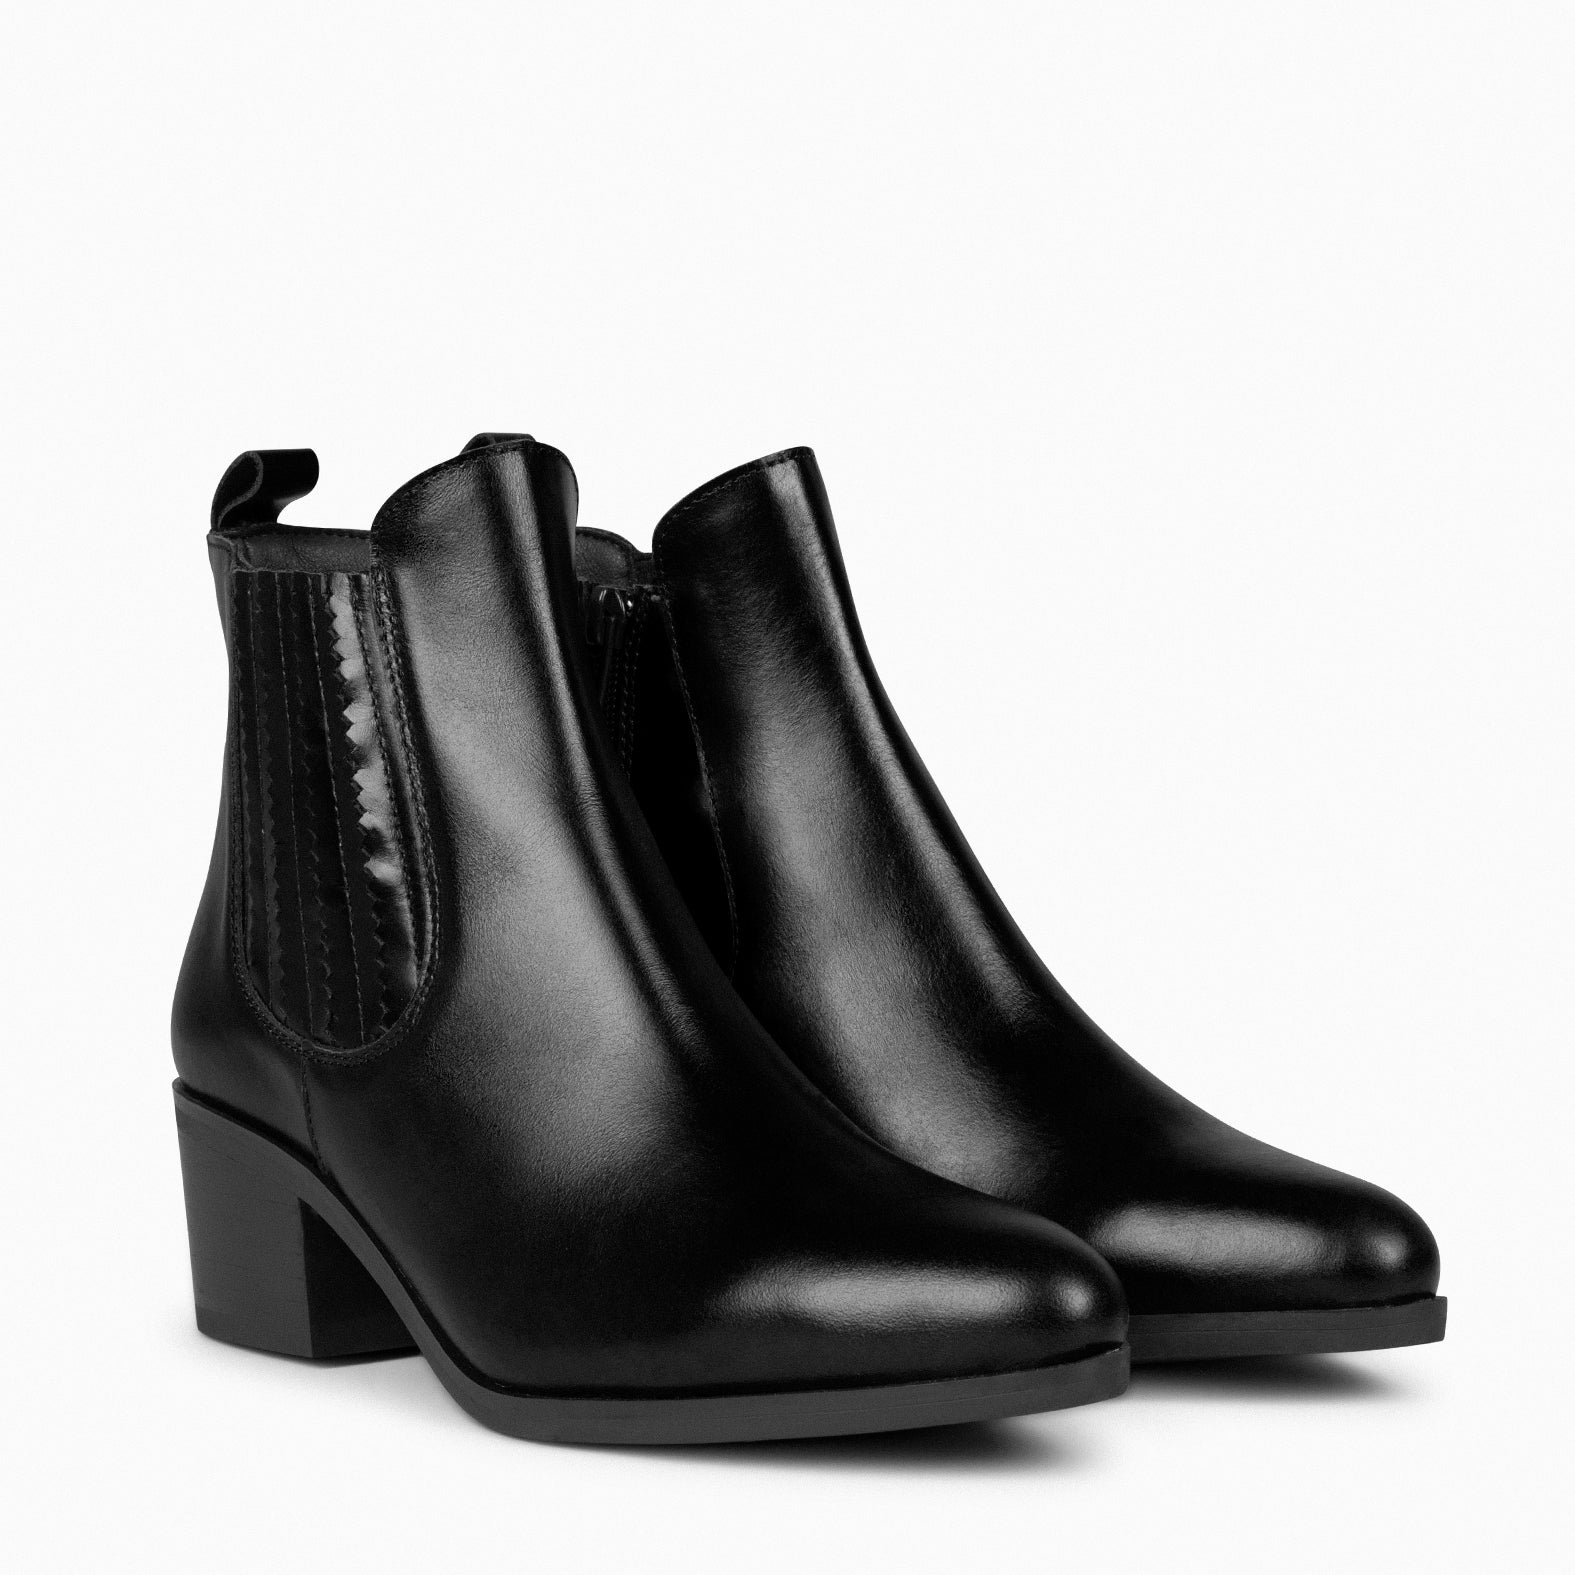 SHELLY – BLACK Country Women  Booties